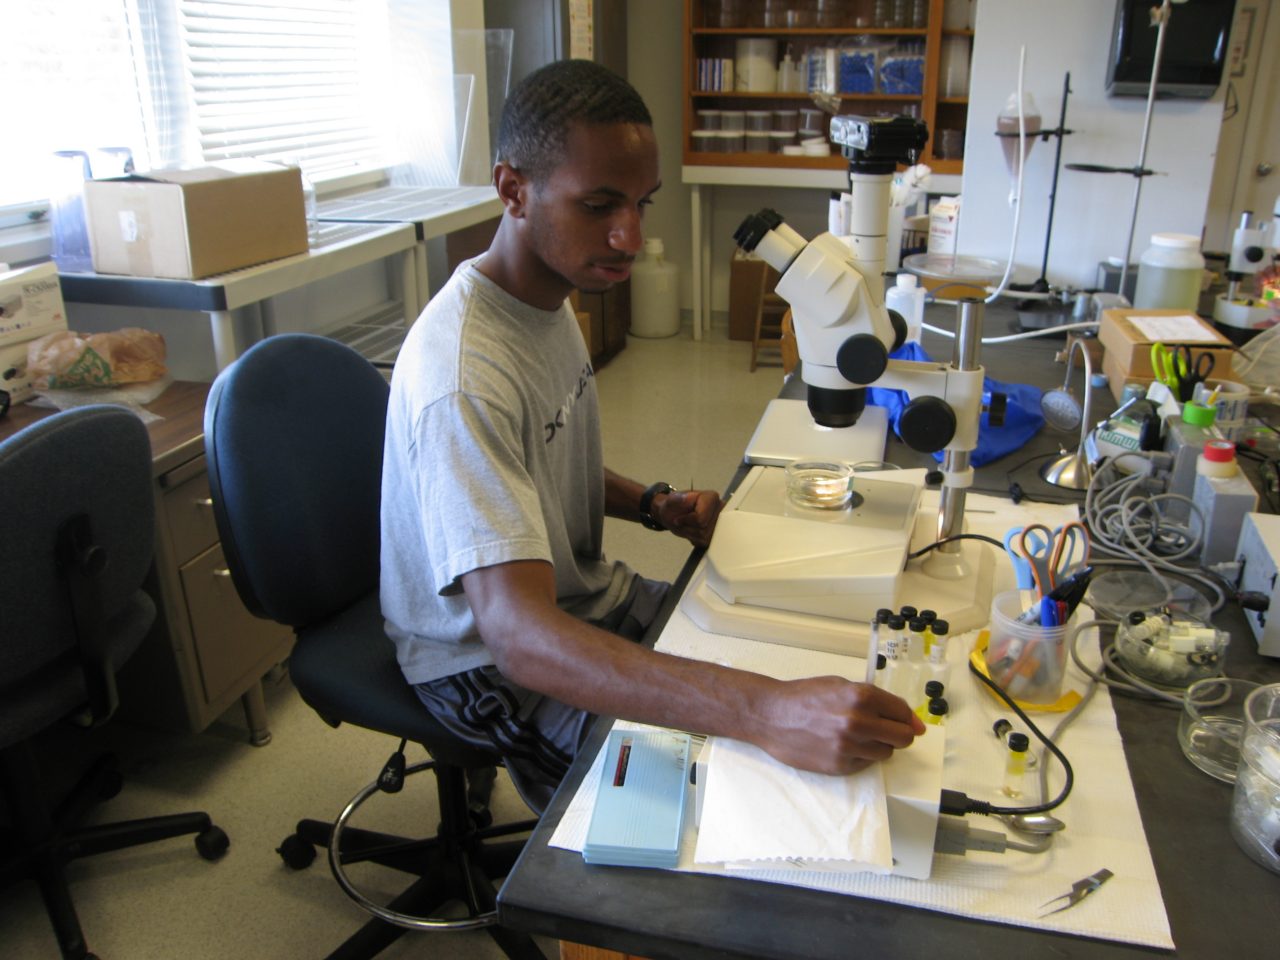 REU student taking notes in a lab, with microscope